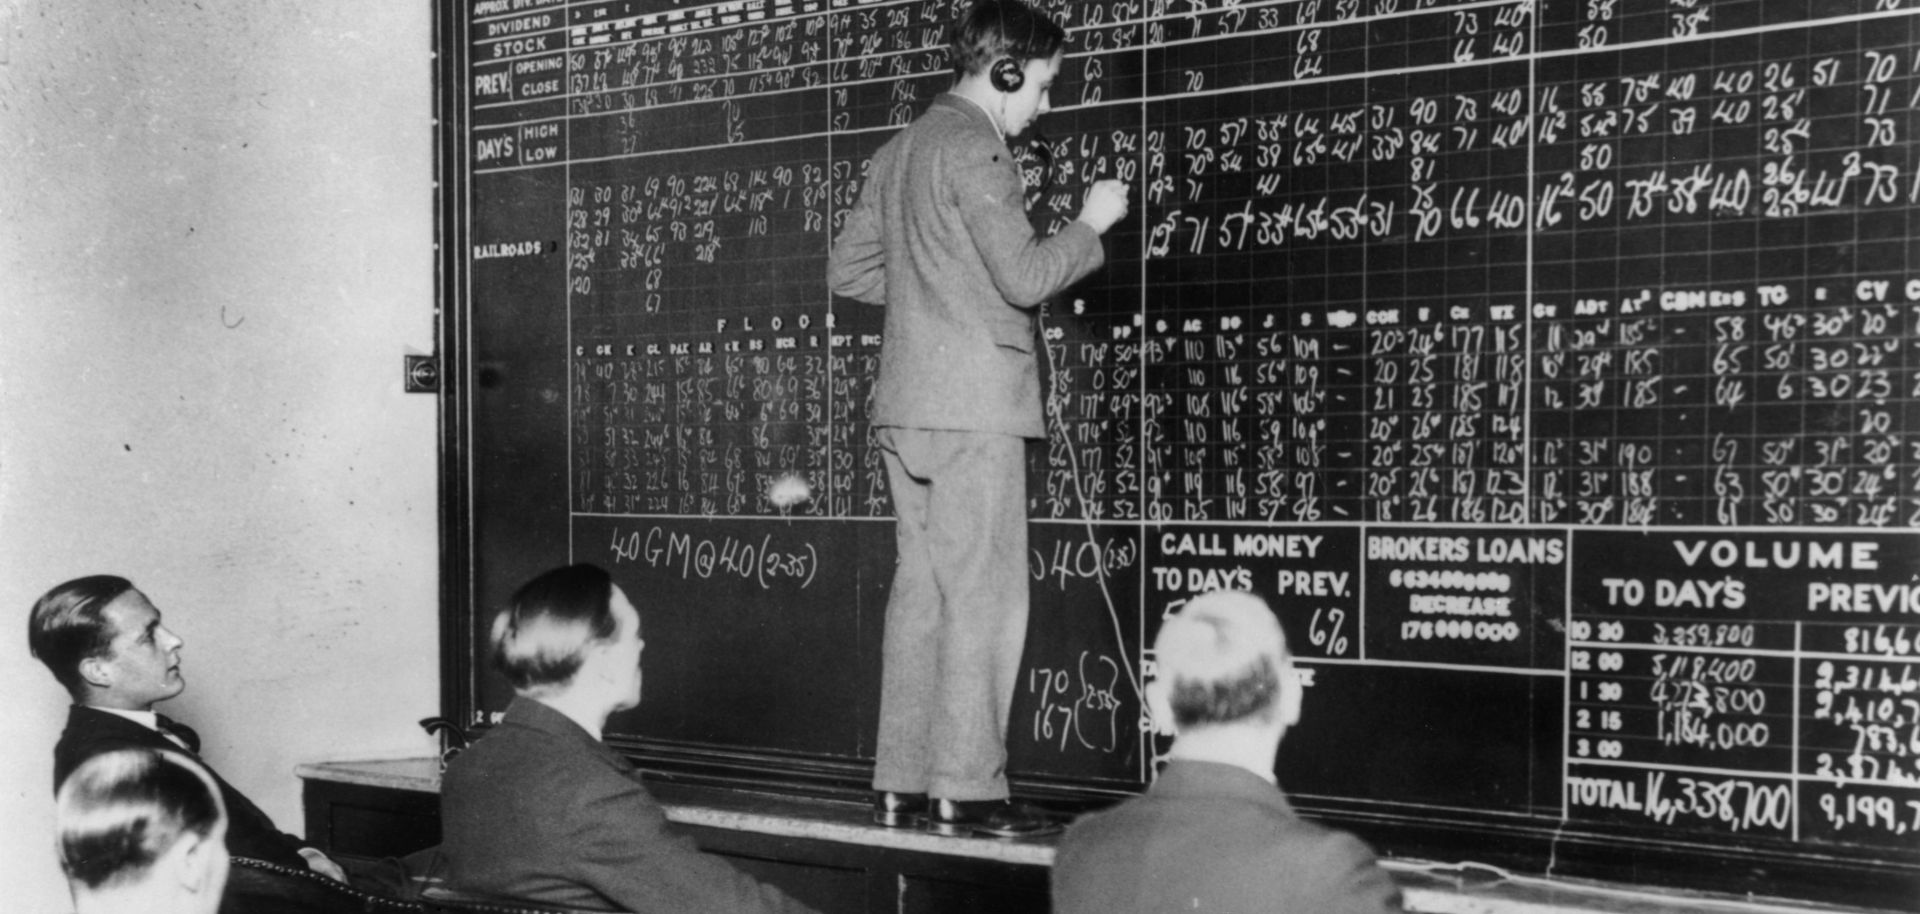 A telephone operator in London records the changes in New York's crashing stock market in 1929 as a few men look on with interest.